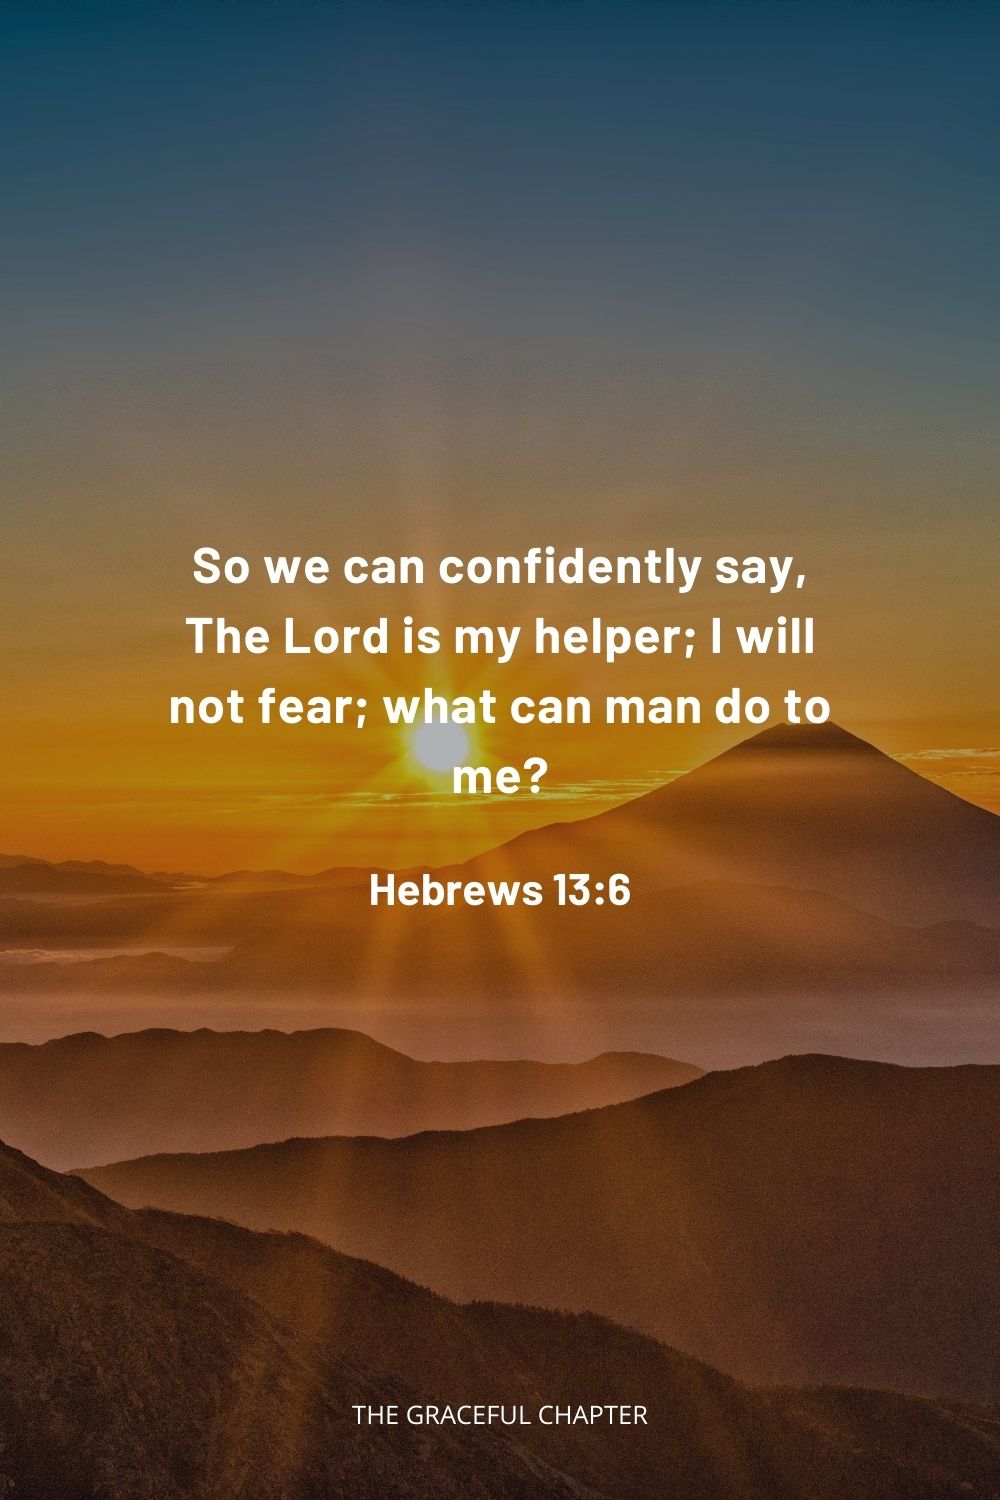  So we can confidently say, The Lord is my helper; I will not fear; what can man do to me? Hebrews 13:6